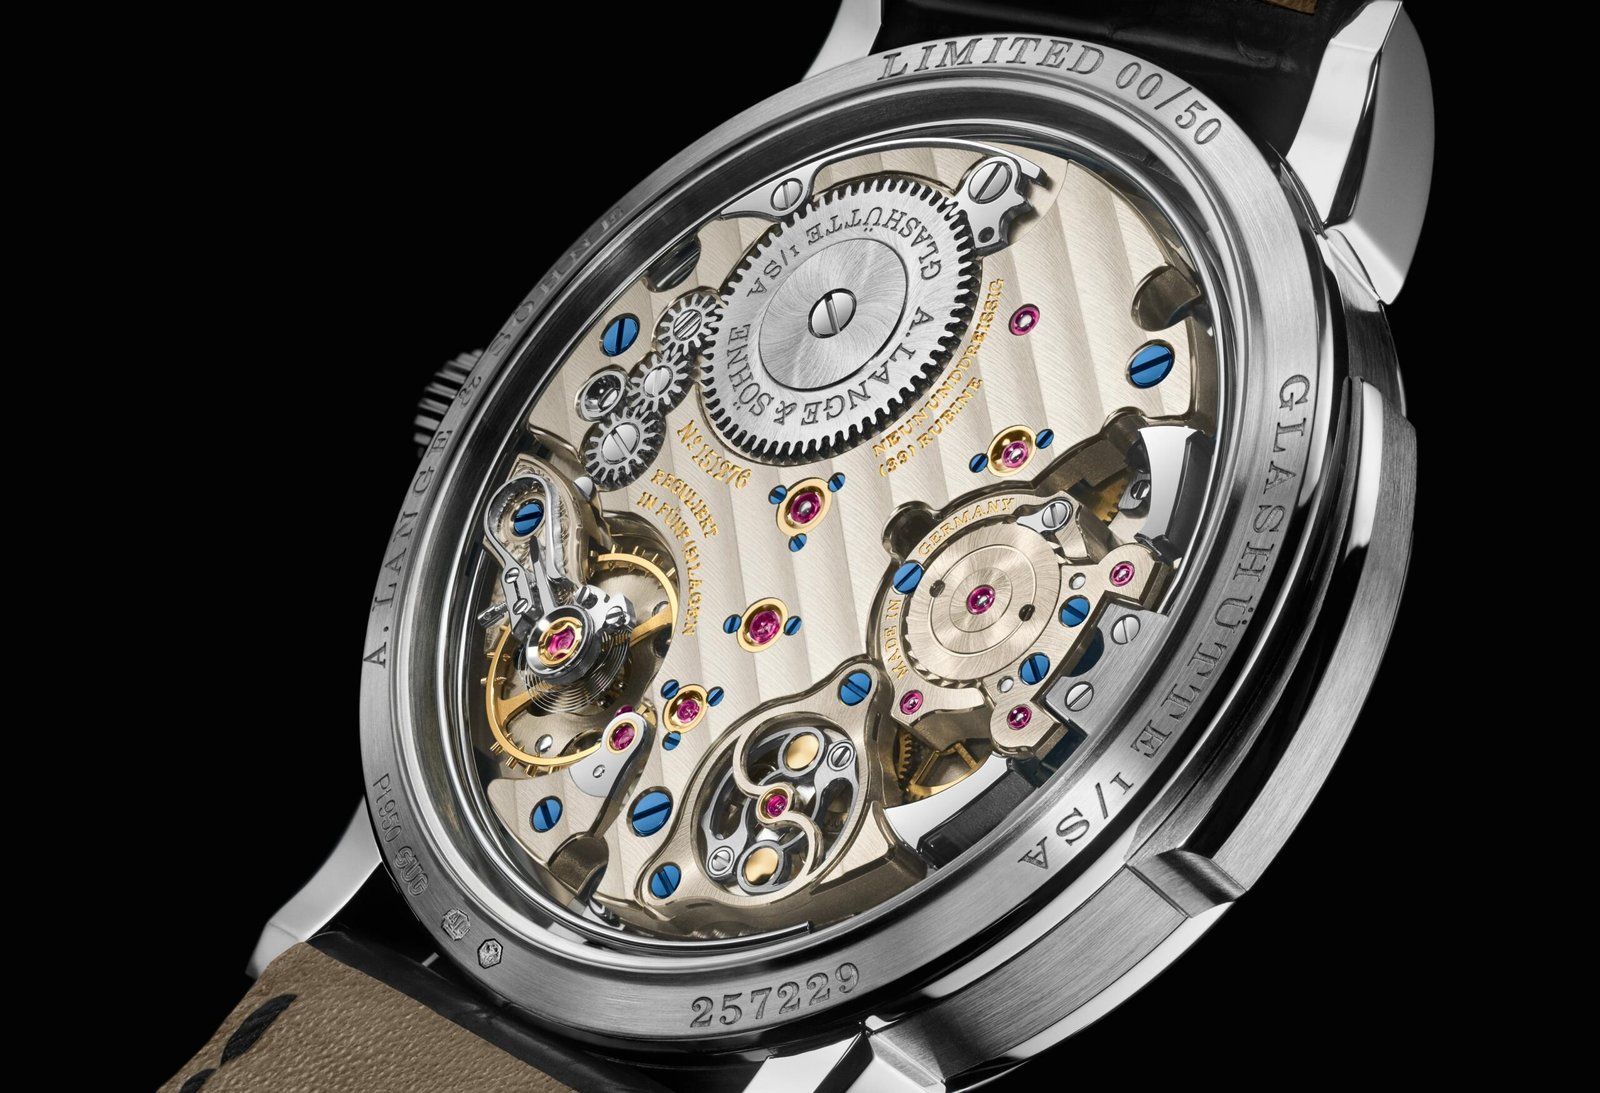 The caseback of the Richard Lange Minute Repeater showcasing the mechanism